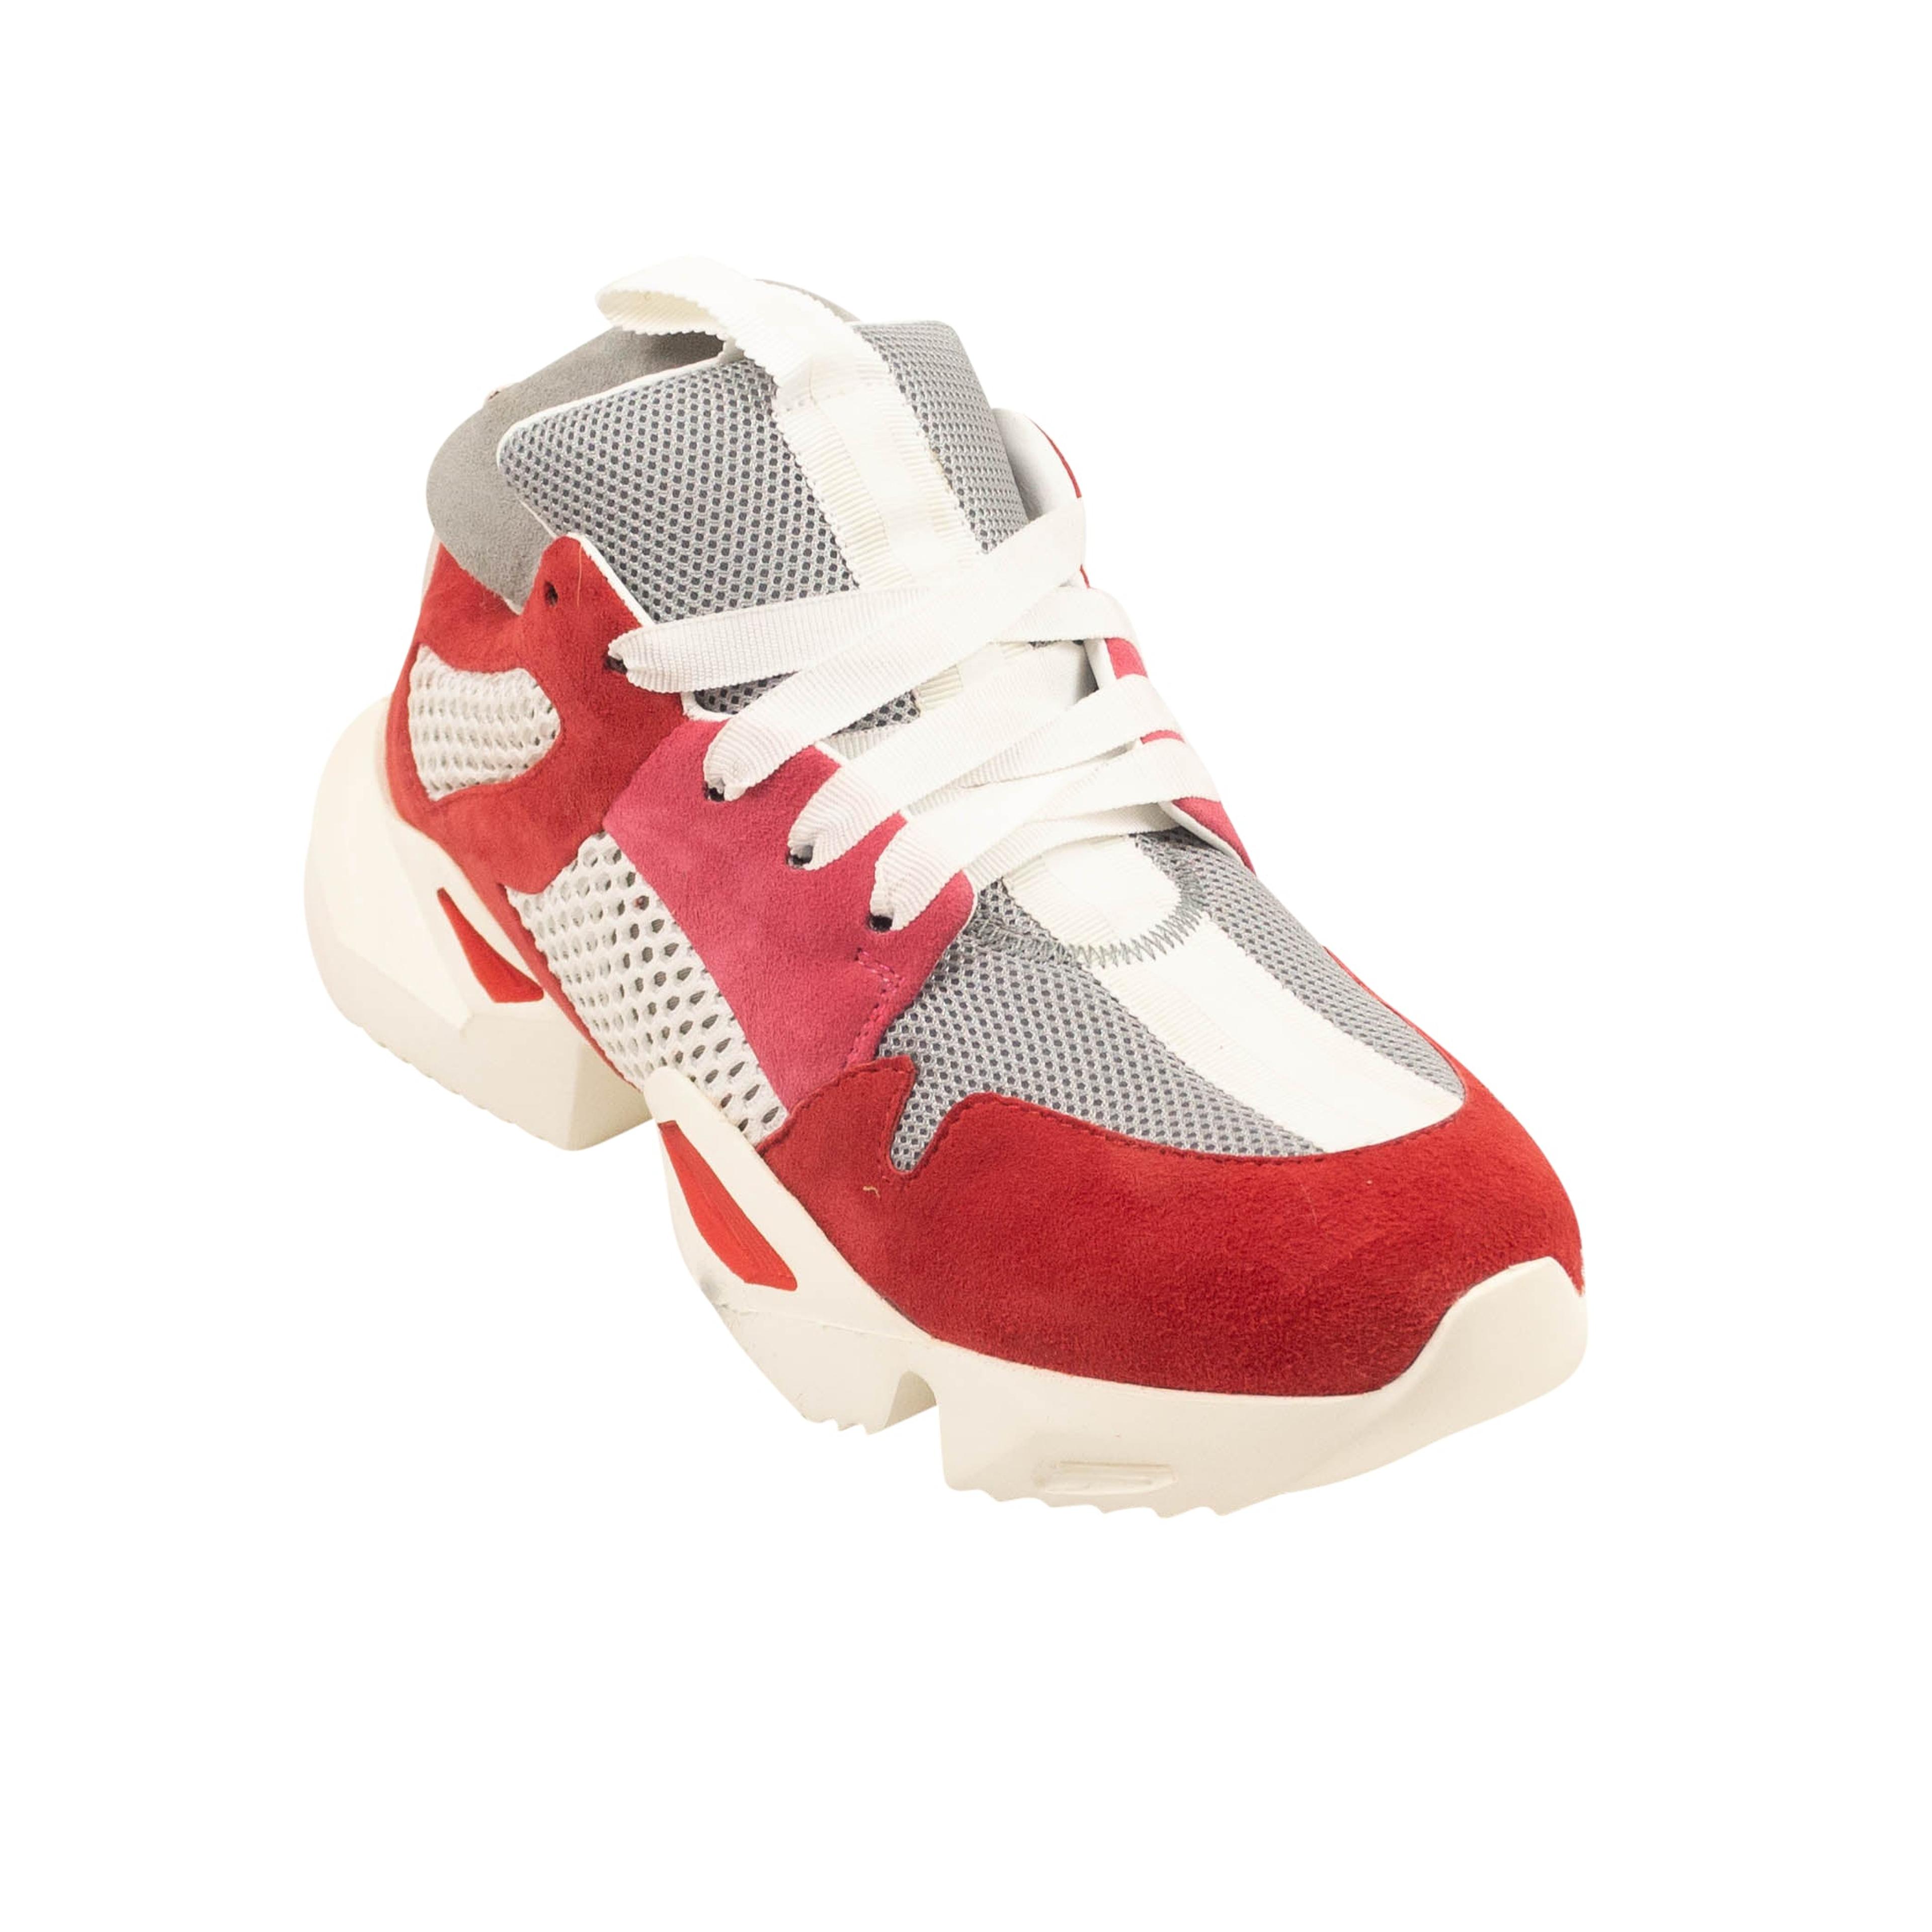 Alternate View 1 of Red, Pink And Grey Mesh Suede Sneakers